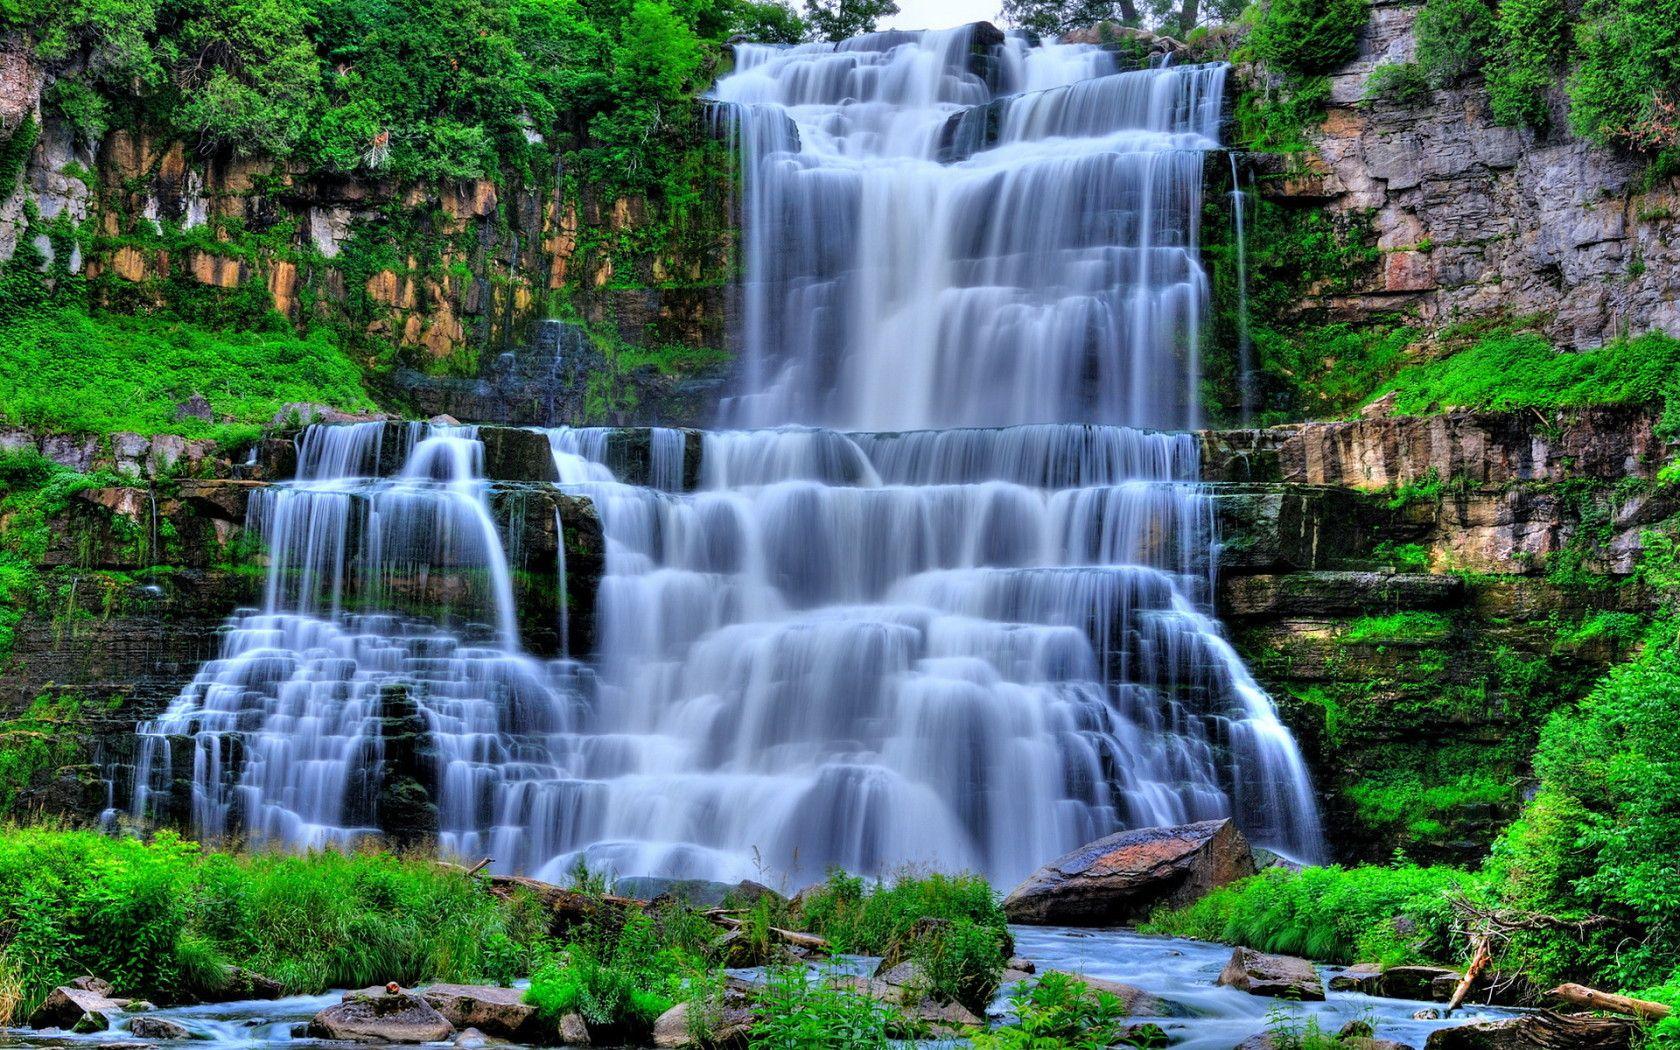 Wallpaper Waterfall For Desktop D Top With Beautiful Nature 3D Waterfalls HD Image Of Pc. Waterfall scenery, Waterfall wallpaper, Waterfall background